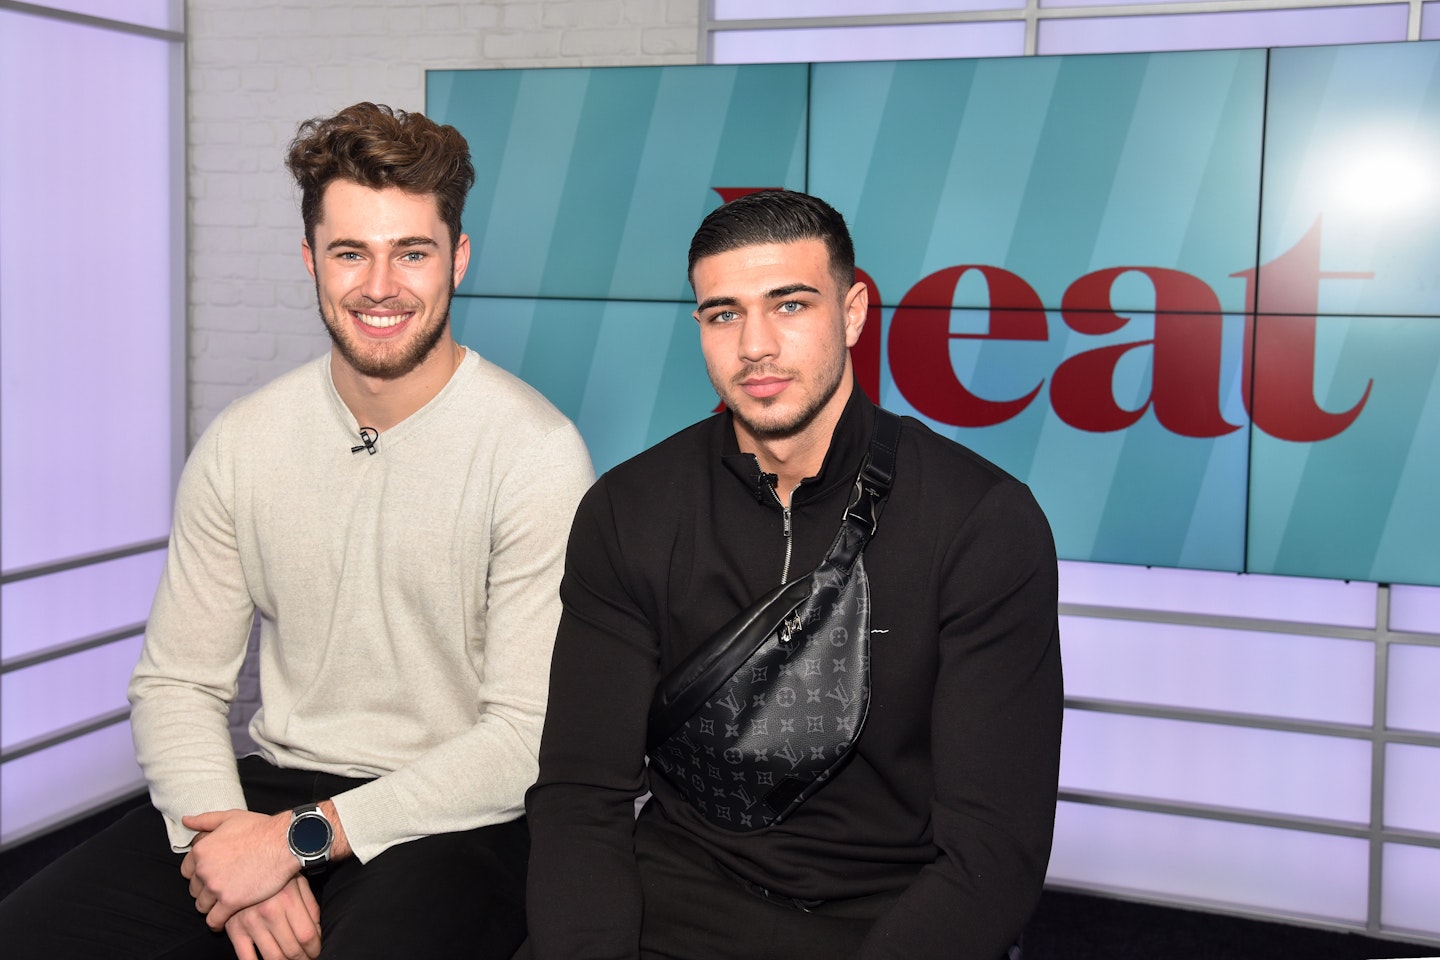 Love Island's Tommy Fury and Curtis Pritchard